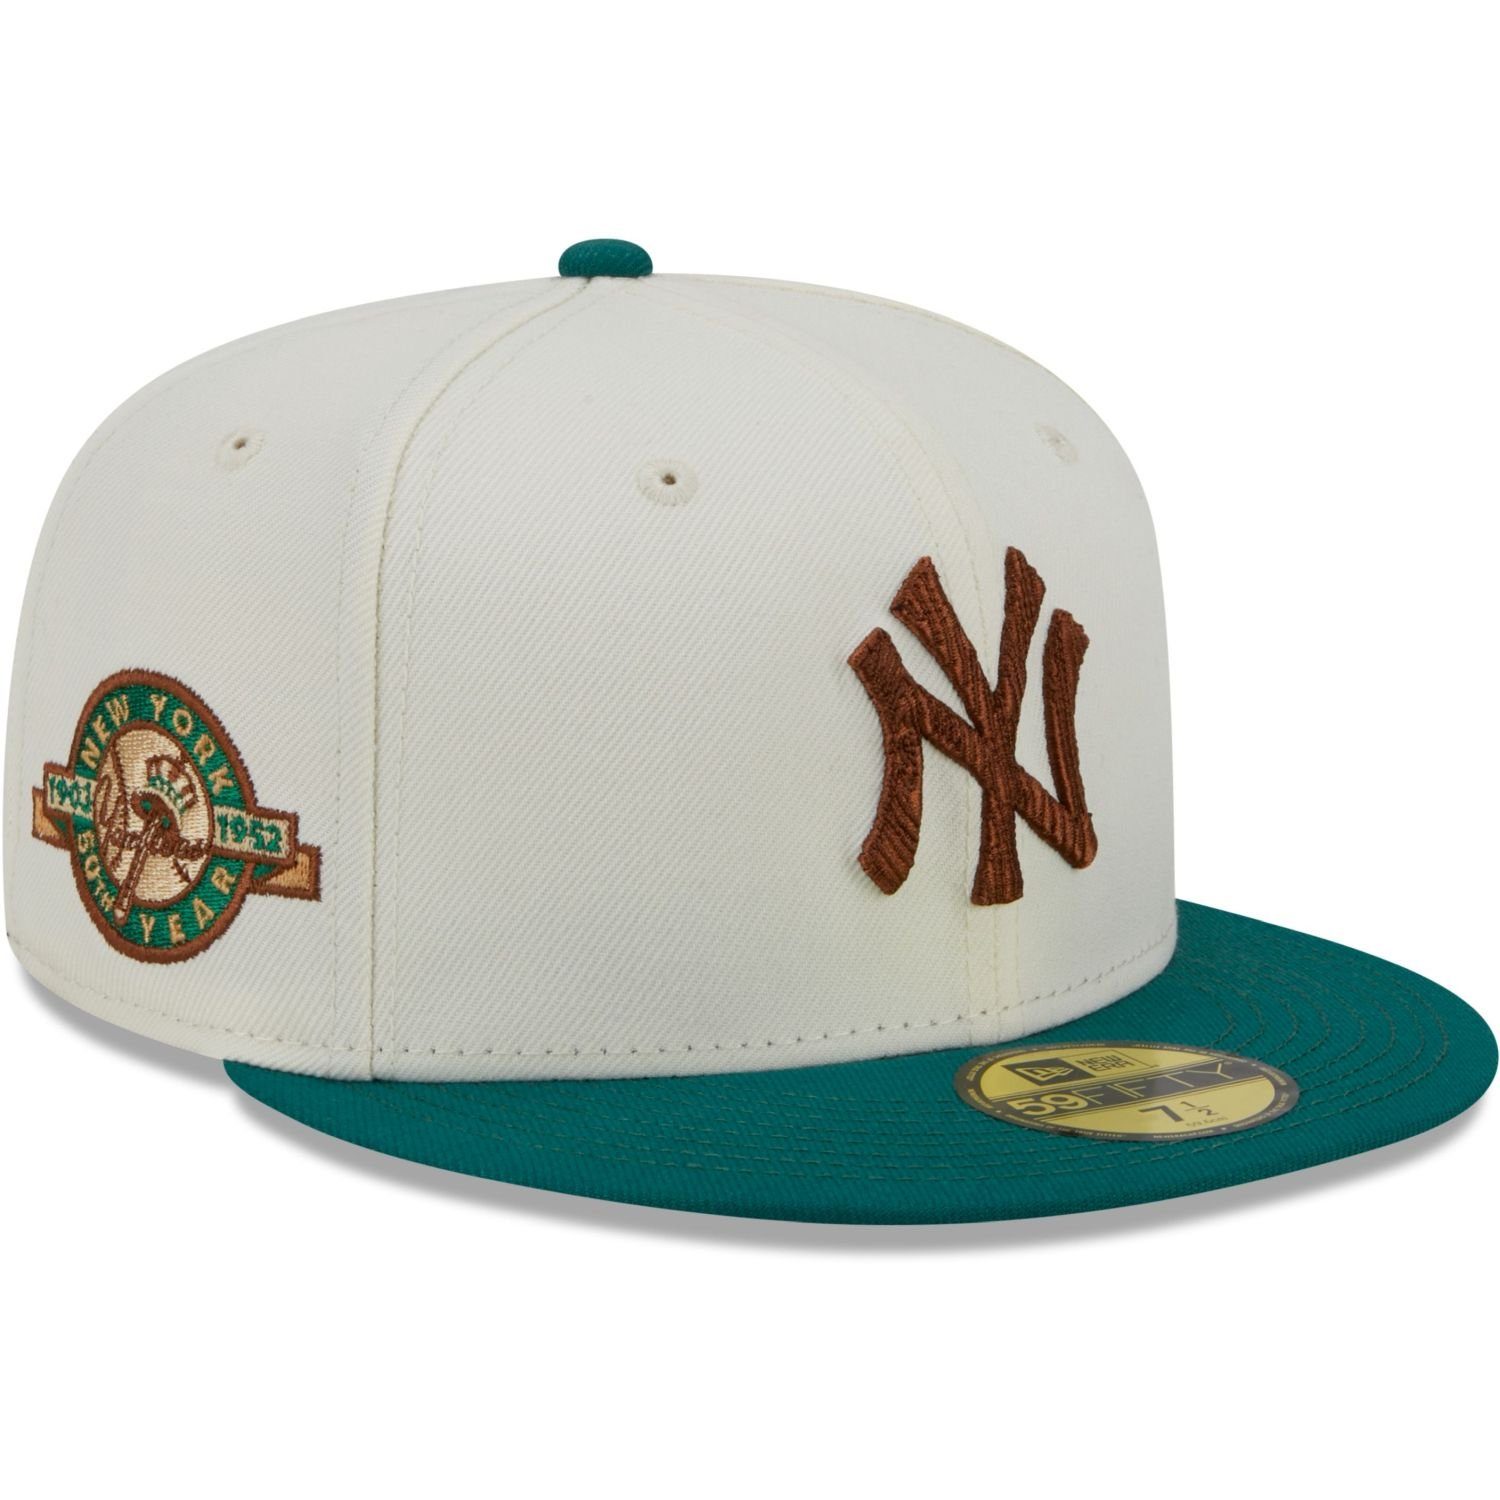 CAMP New Era York Fitted New Cap Yankees 59Fifty